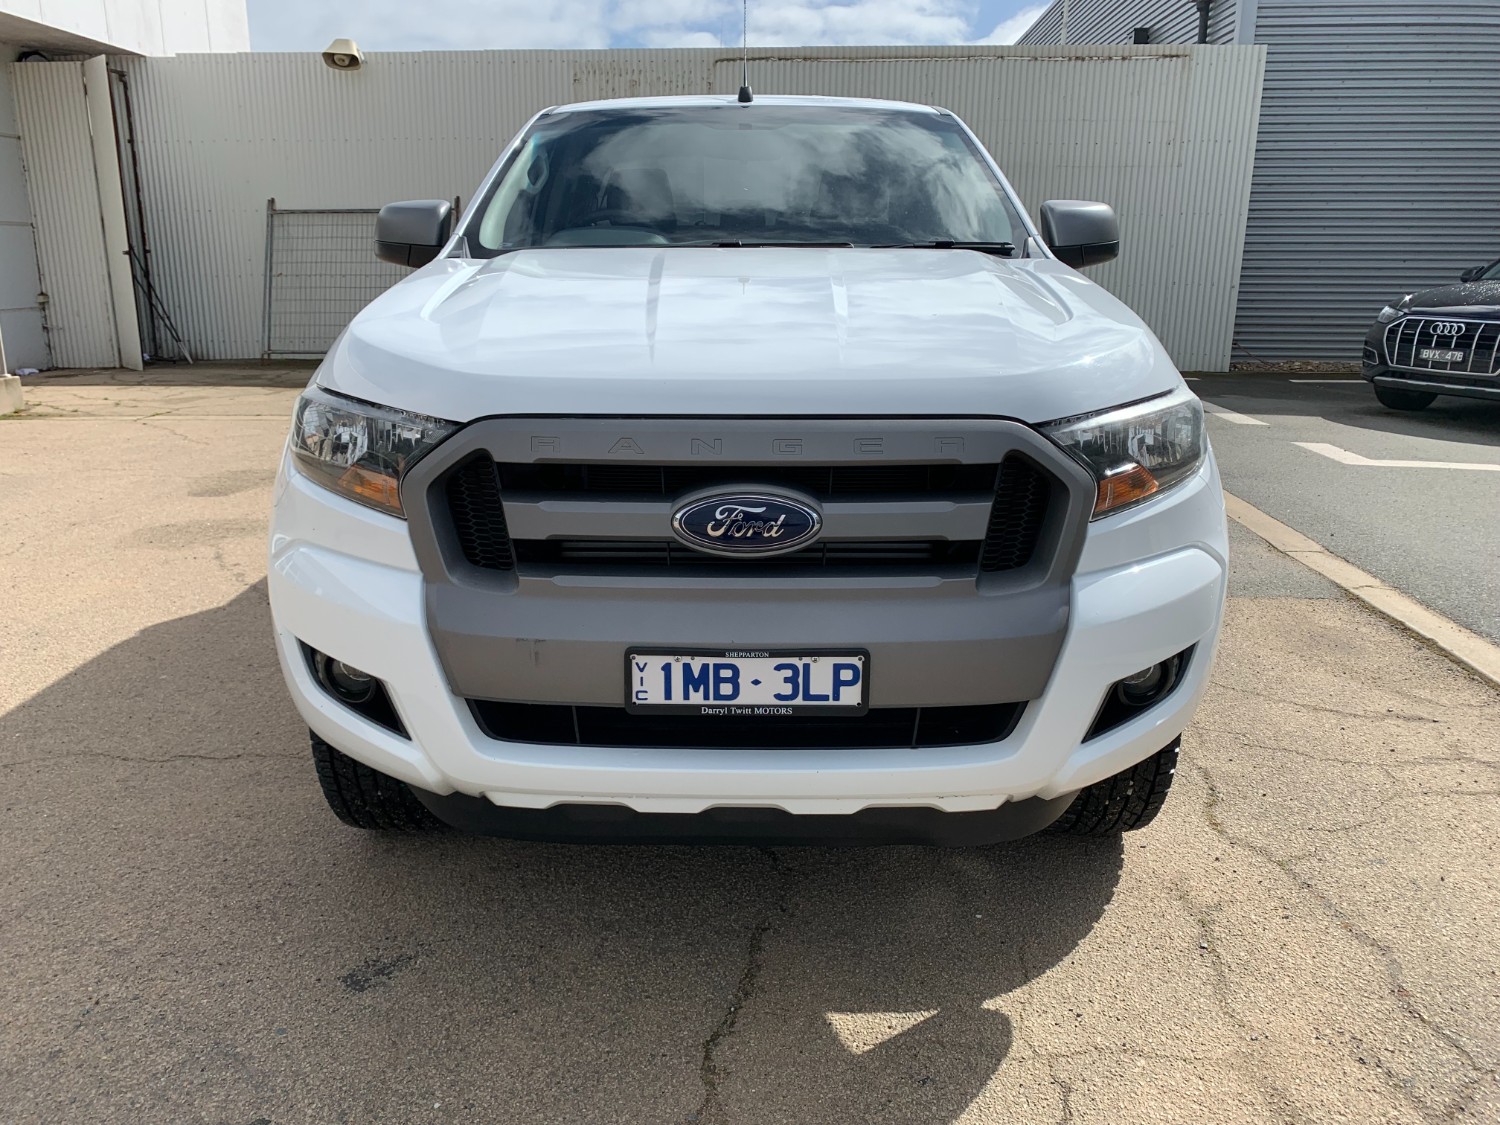 2018 Ford Ranger PX MkII XLS Ute Image 5